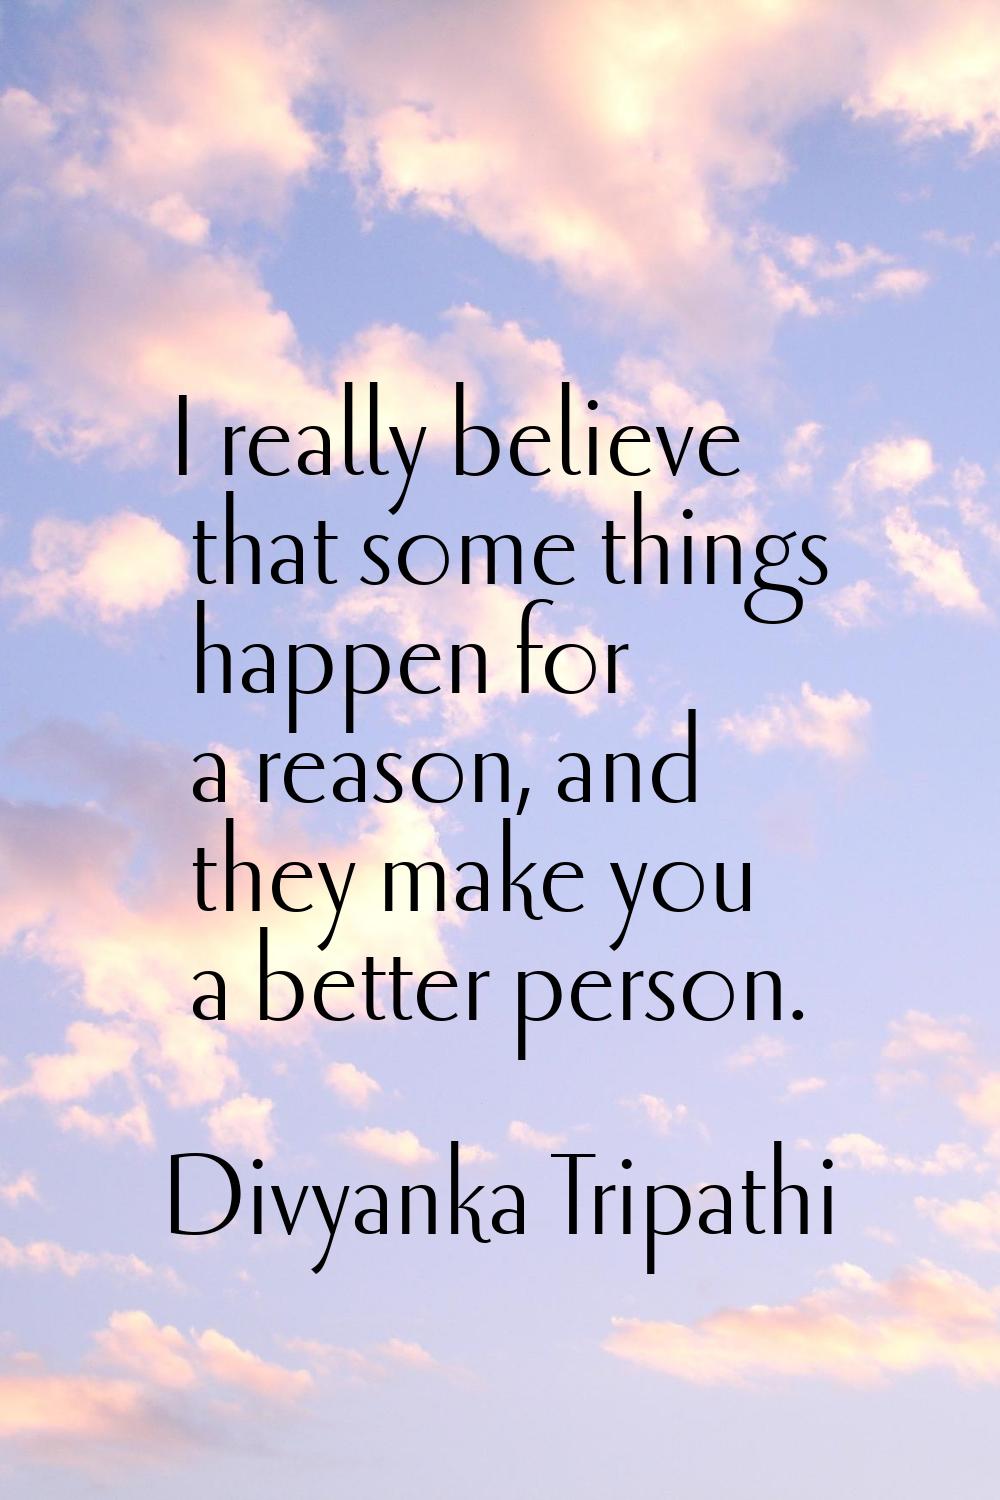 I really believe that some things happen for a reason, and they make you a better person.